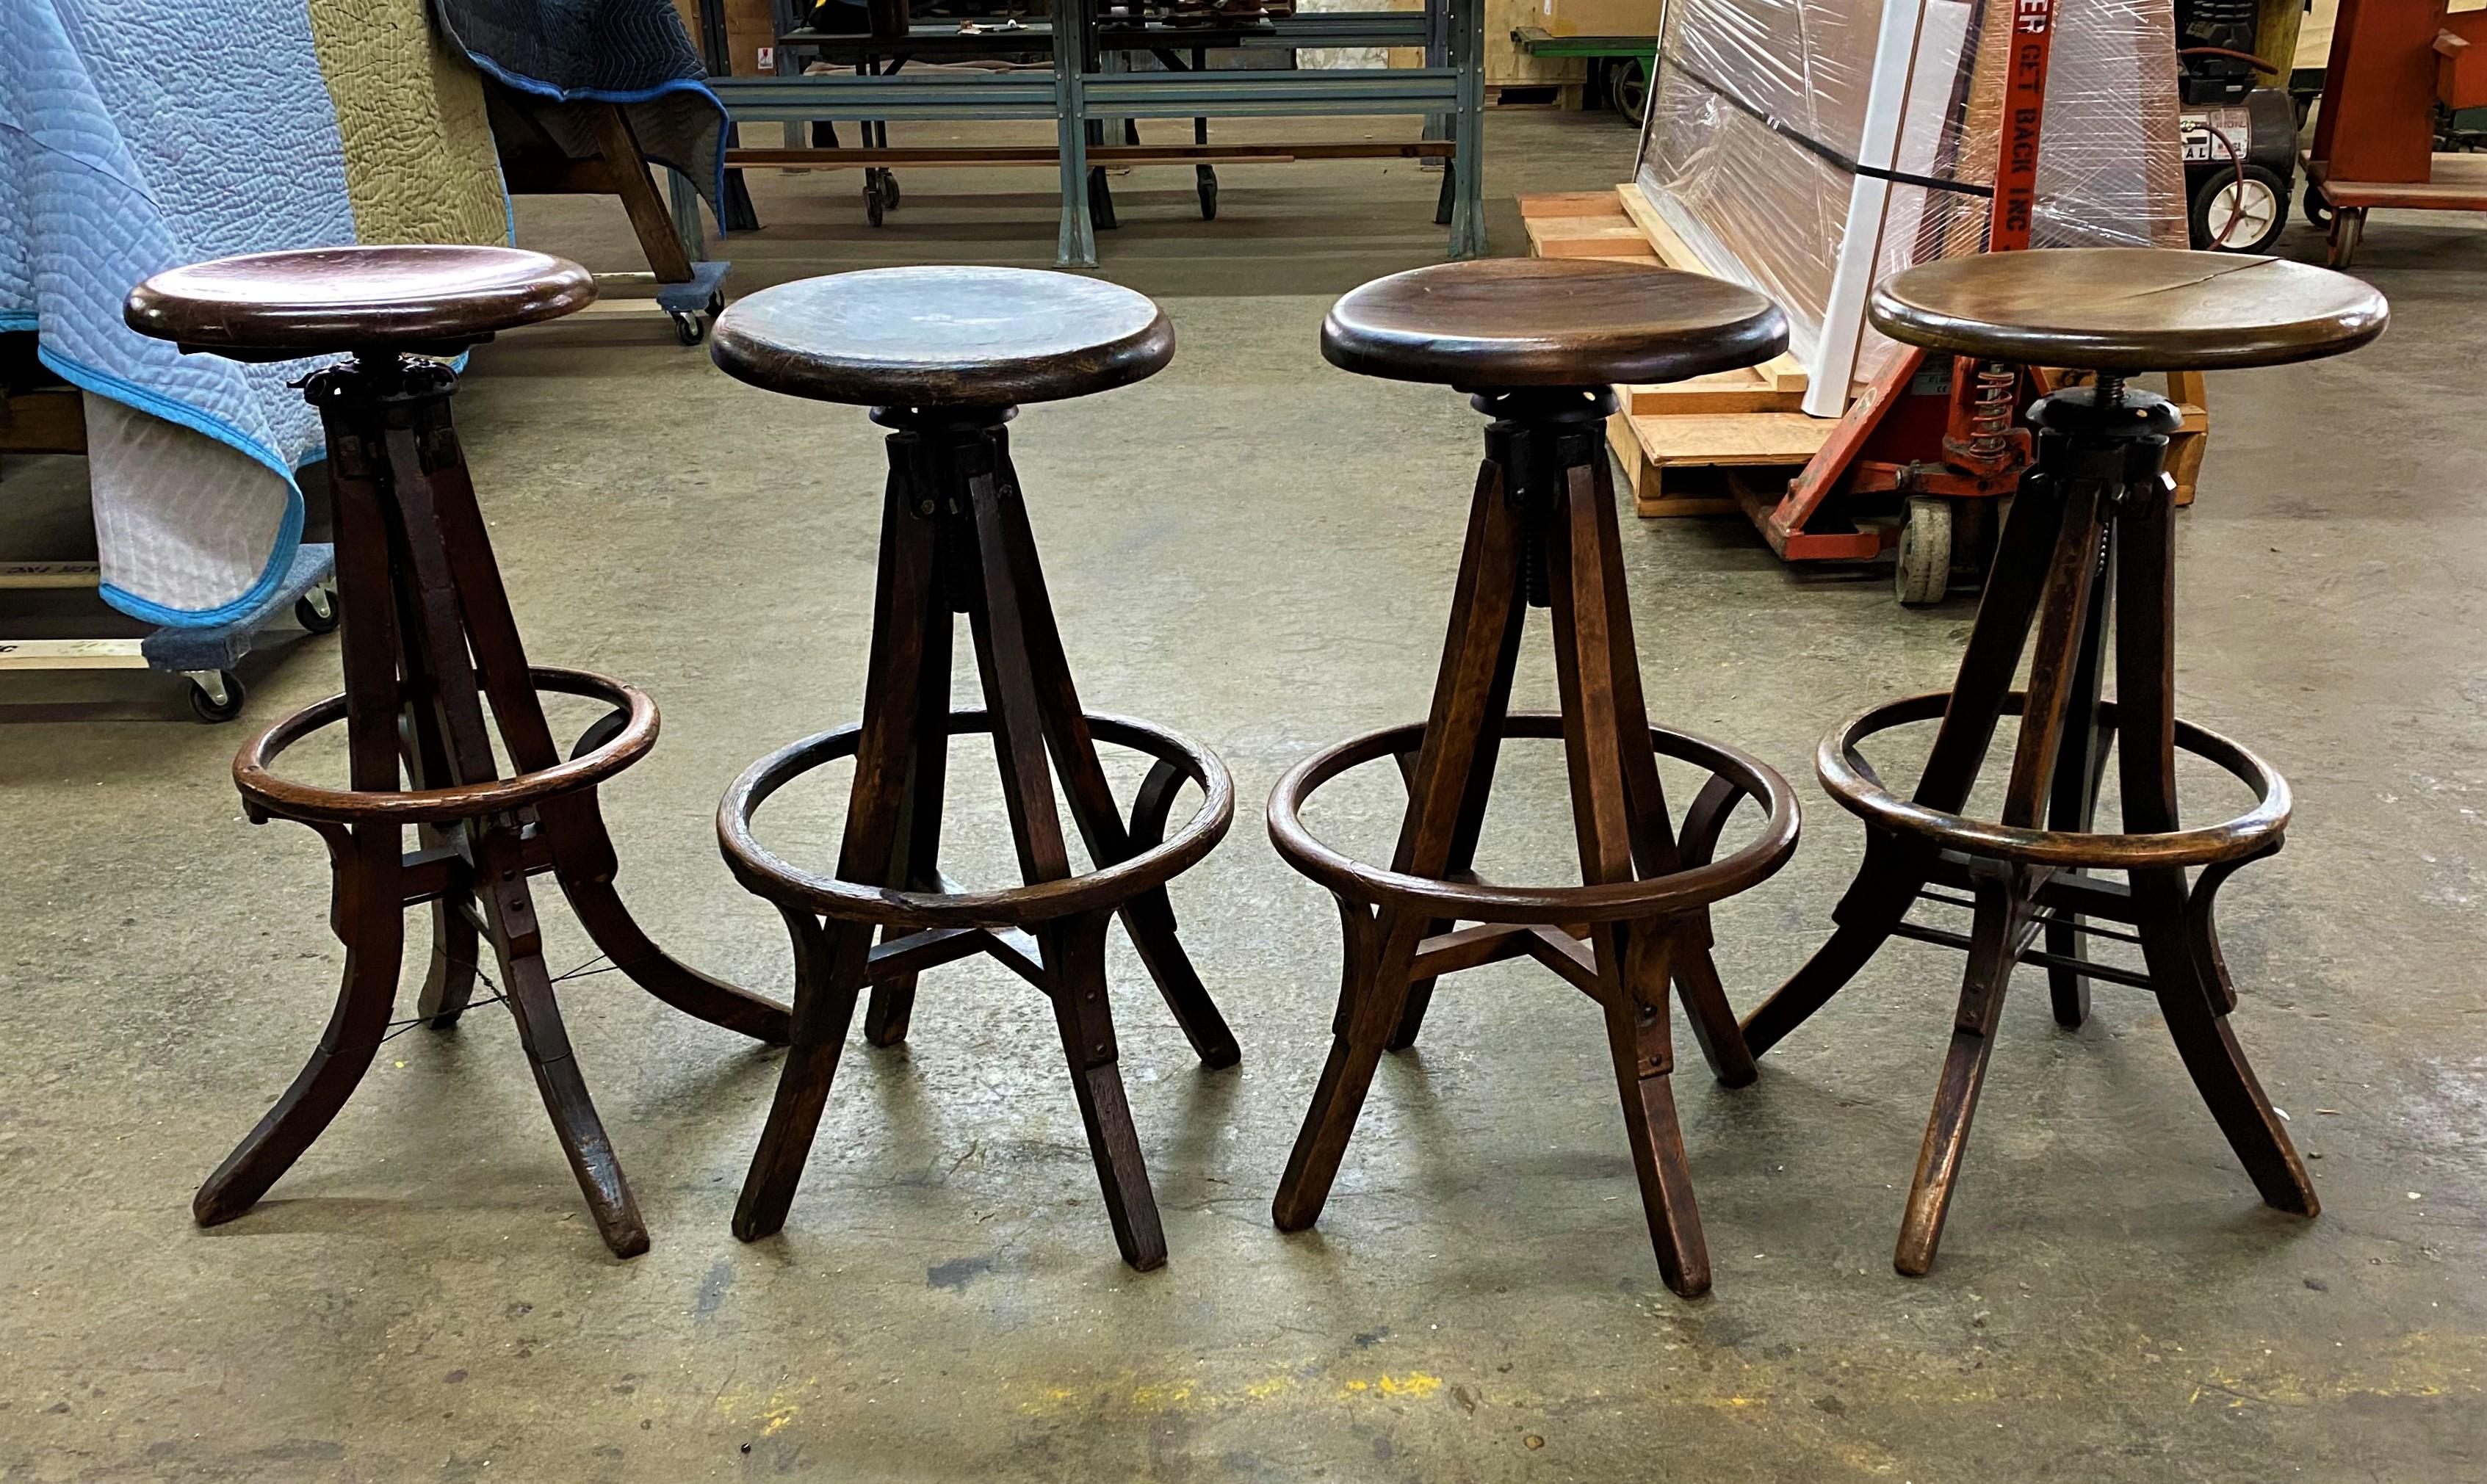 Set of 4 Drafting stools
Overall Dimensions: 21